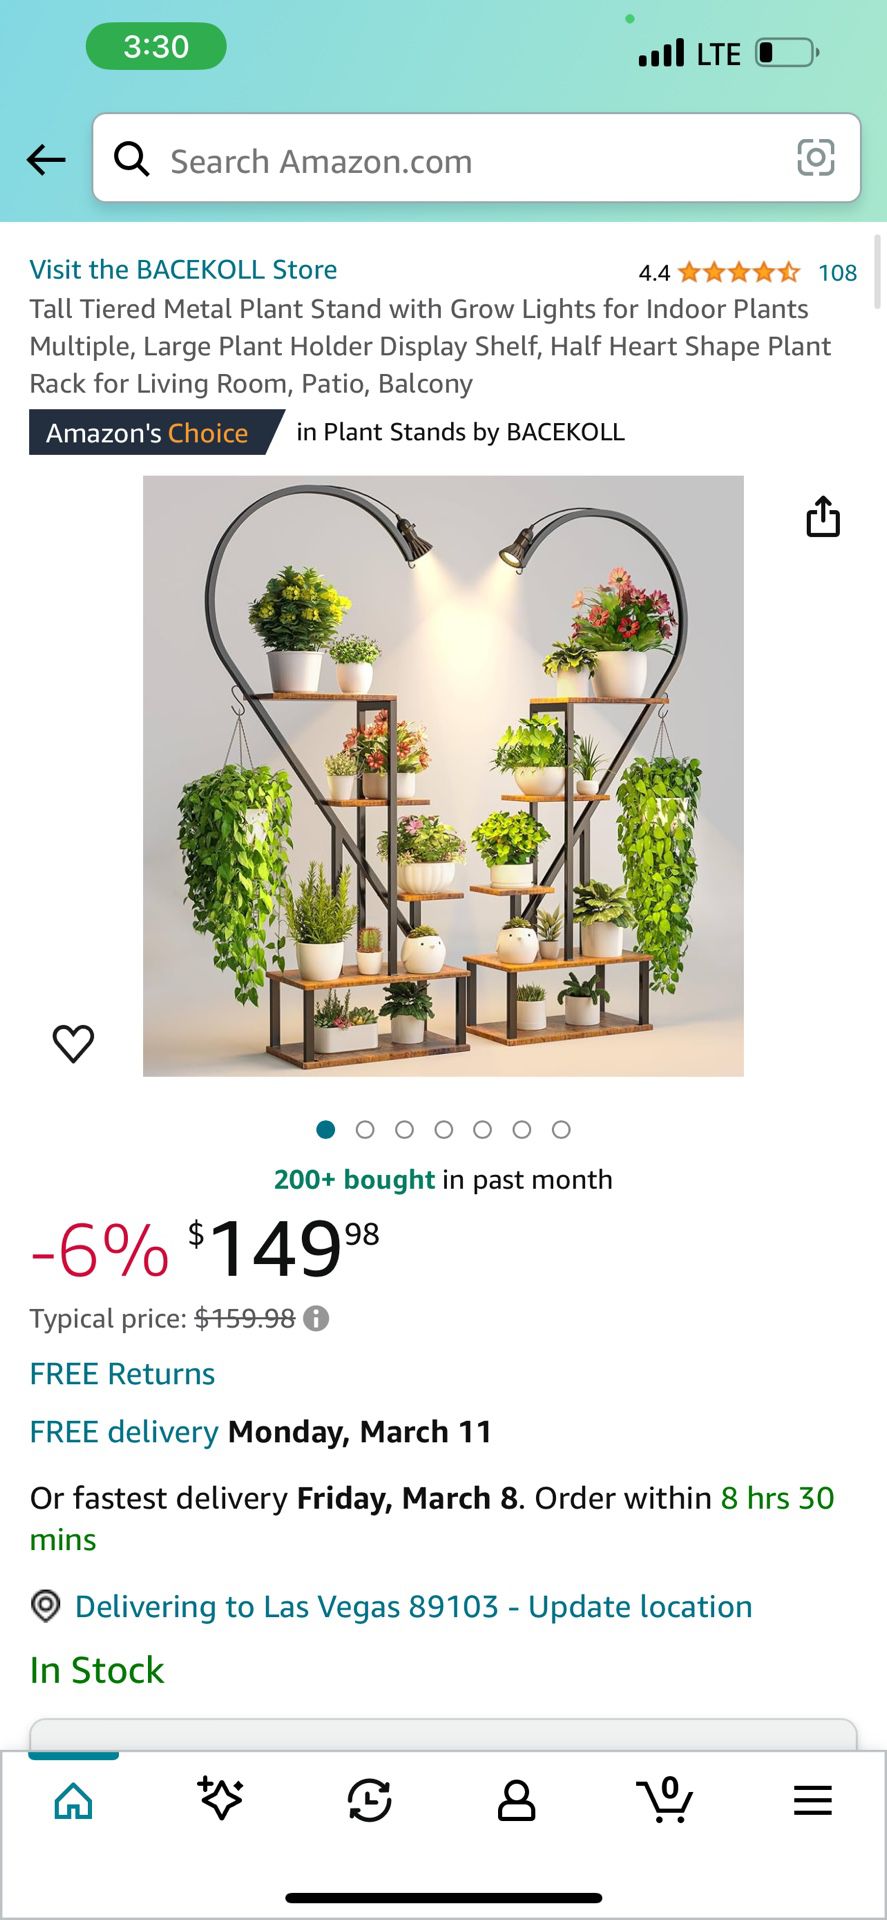 Tall Tiered Metal Plant Stand with Grow Lights for Indoor Plants